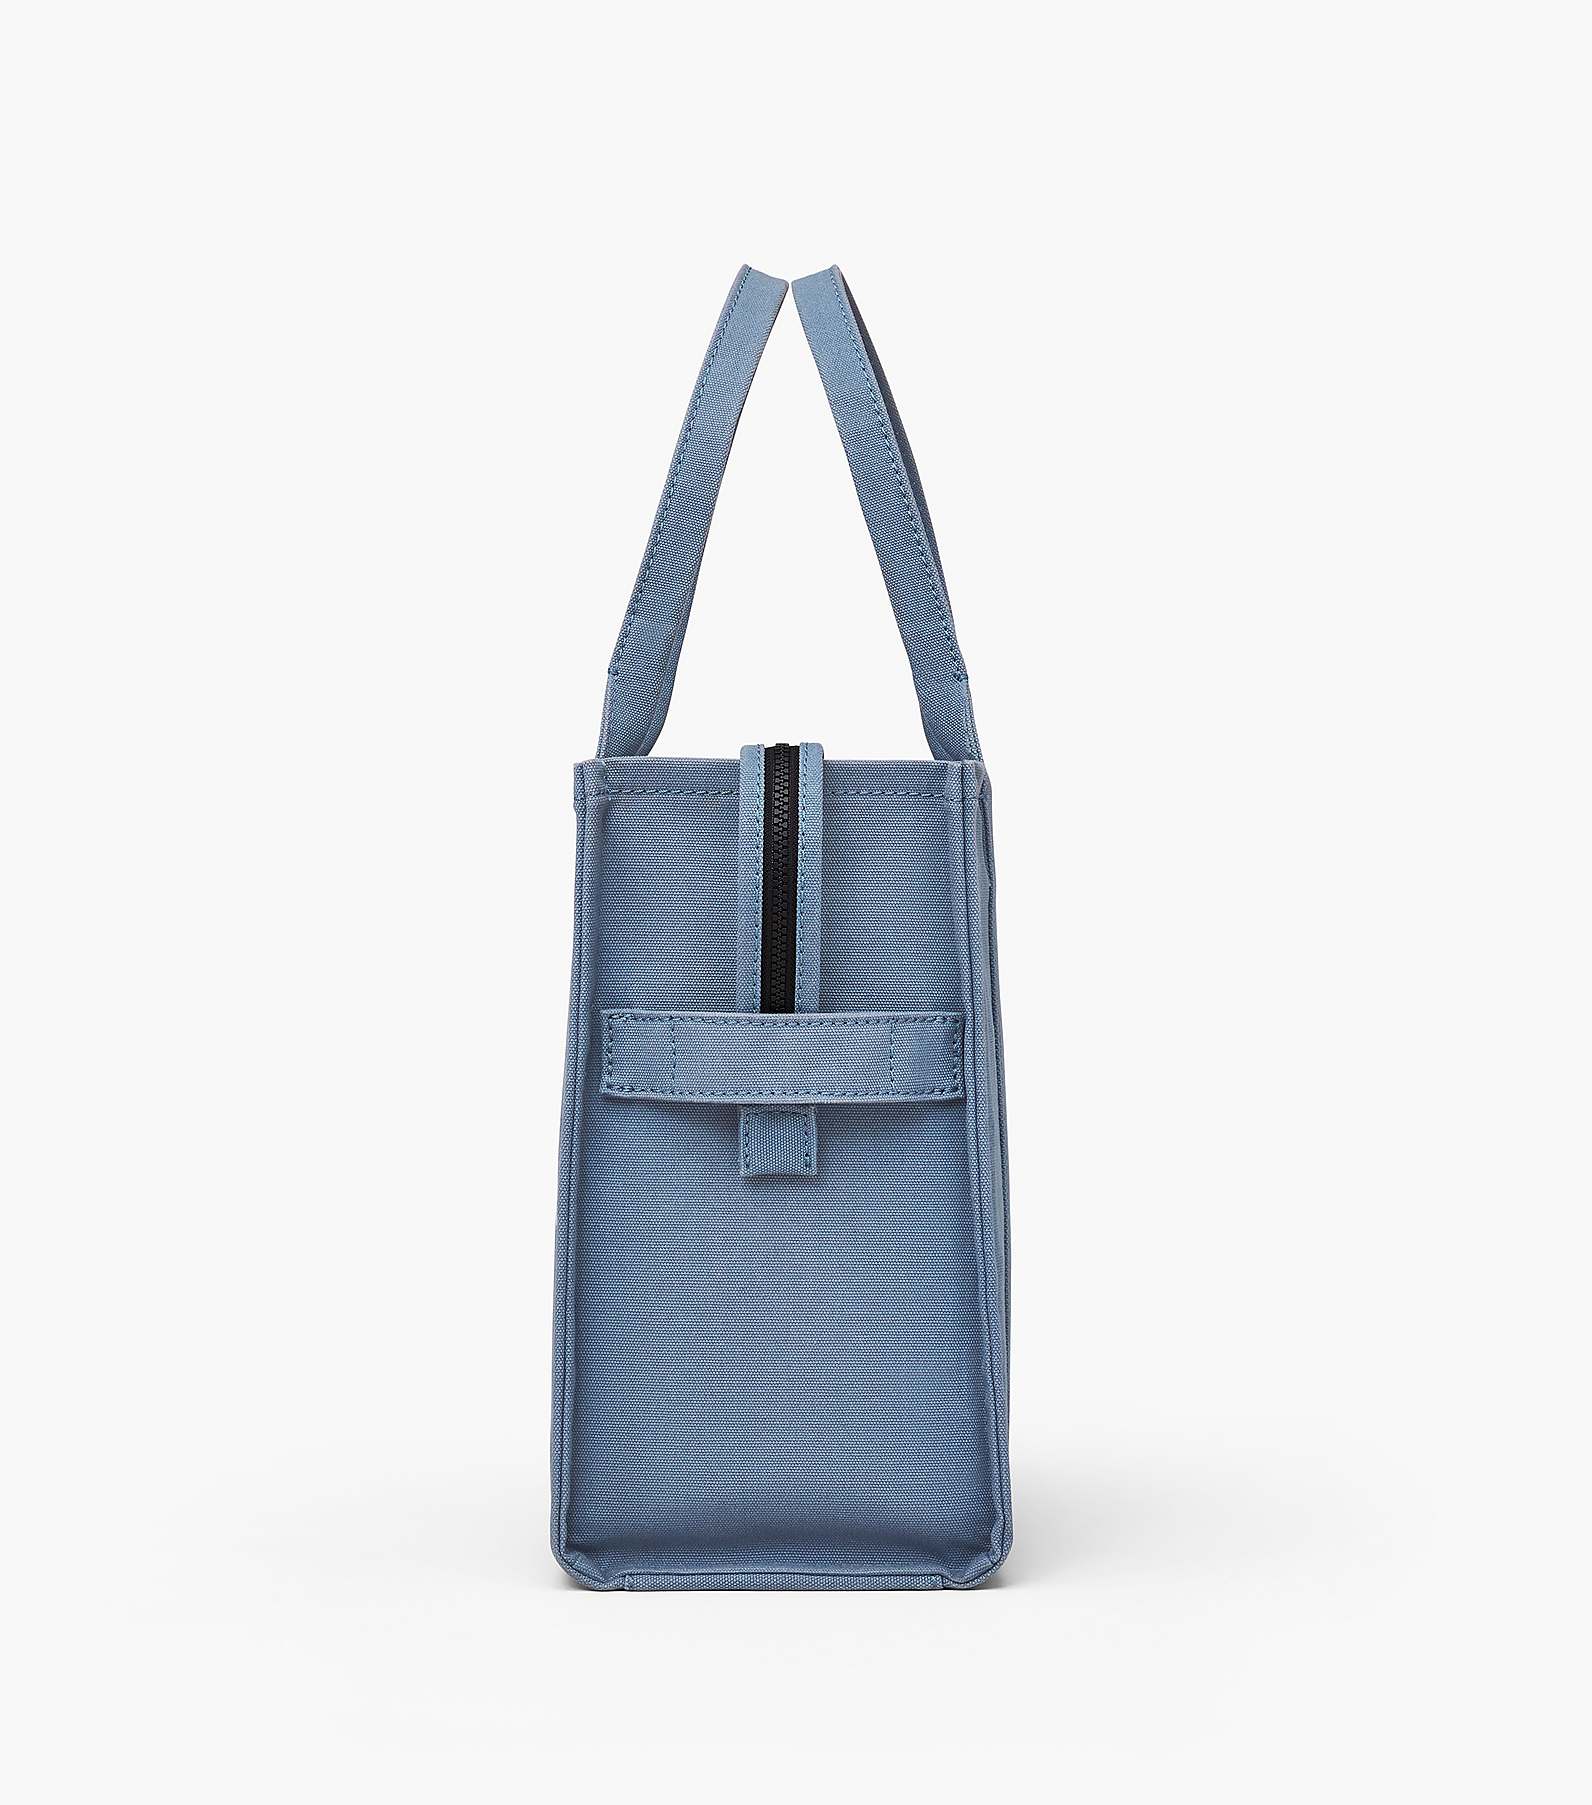 The Large Tote Bag(The Tote Bag)